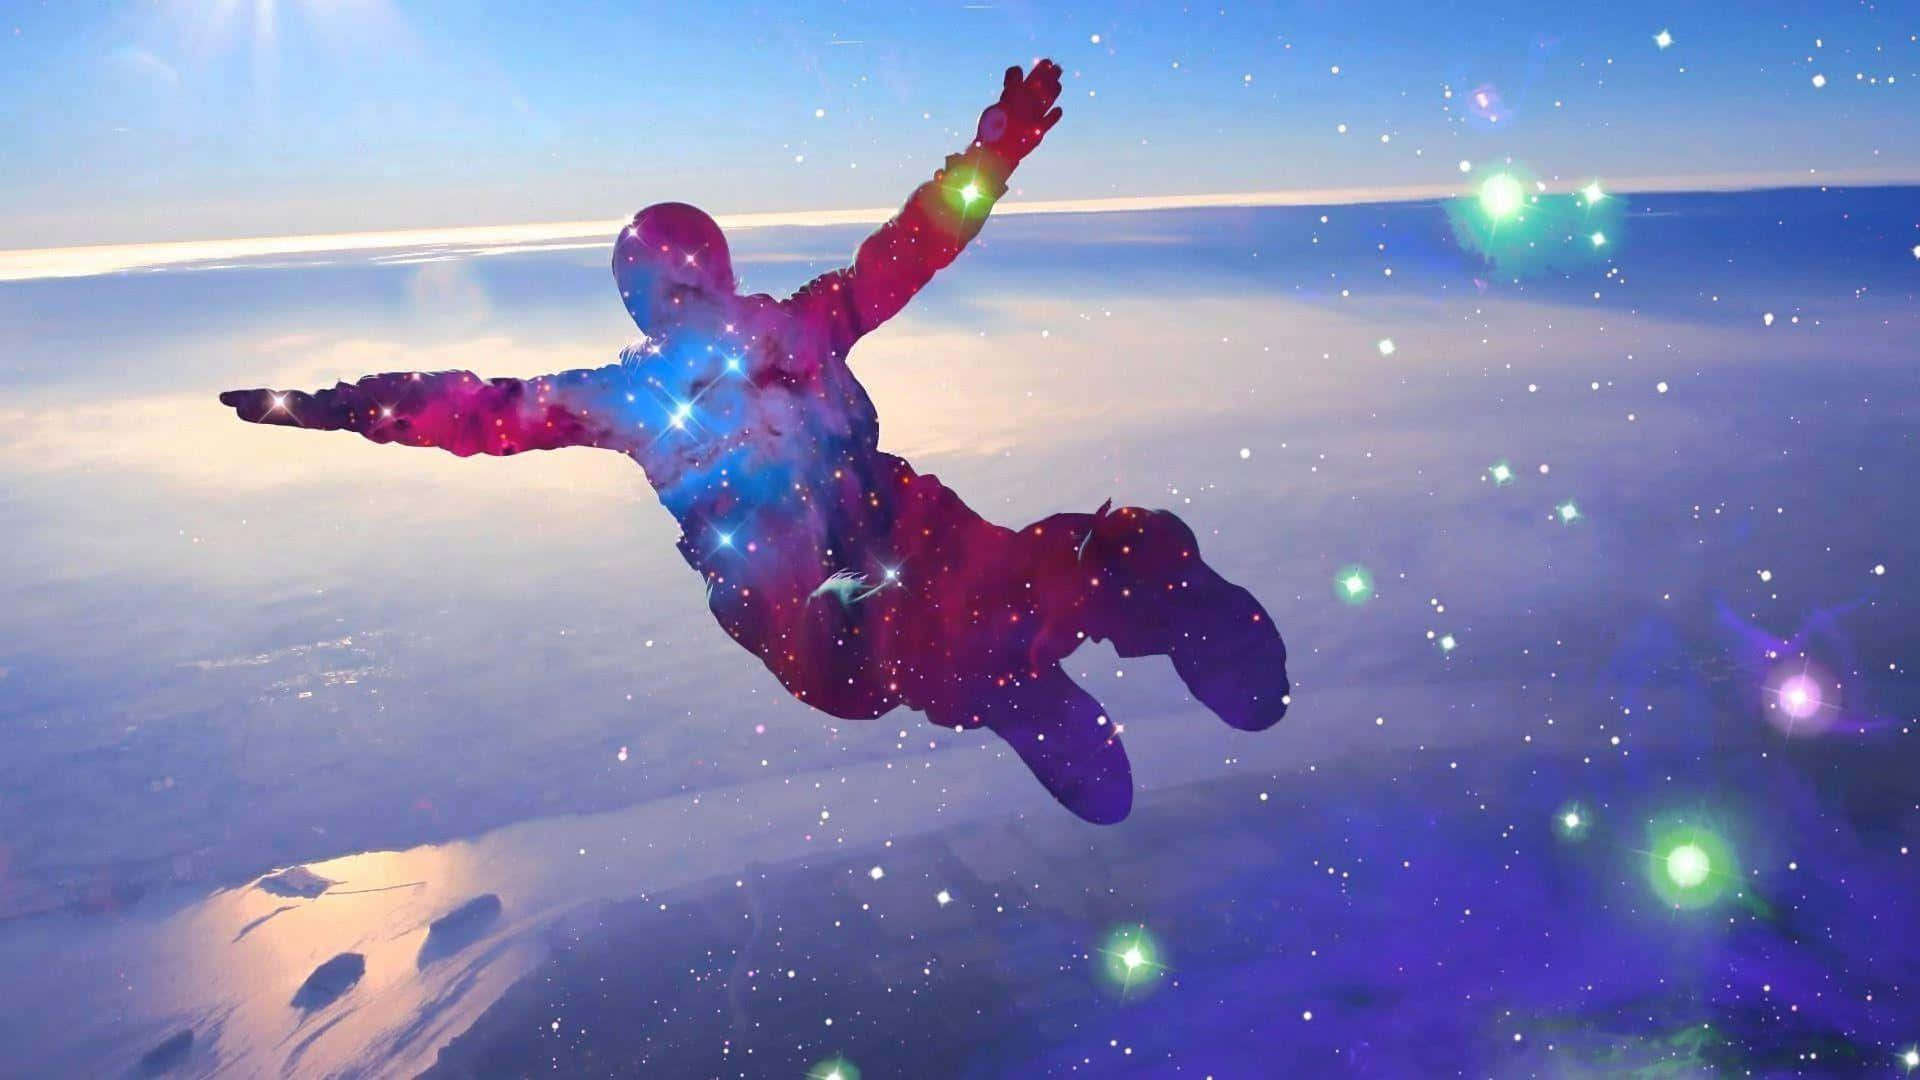 A Person Is Jumping In The Air With Colorful Stars